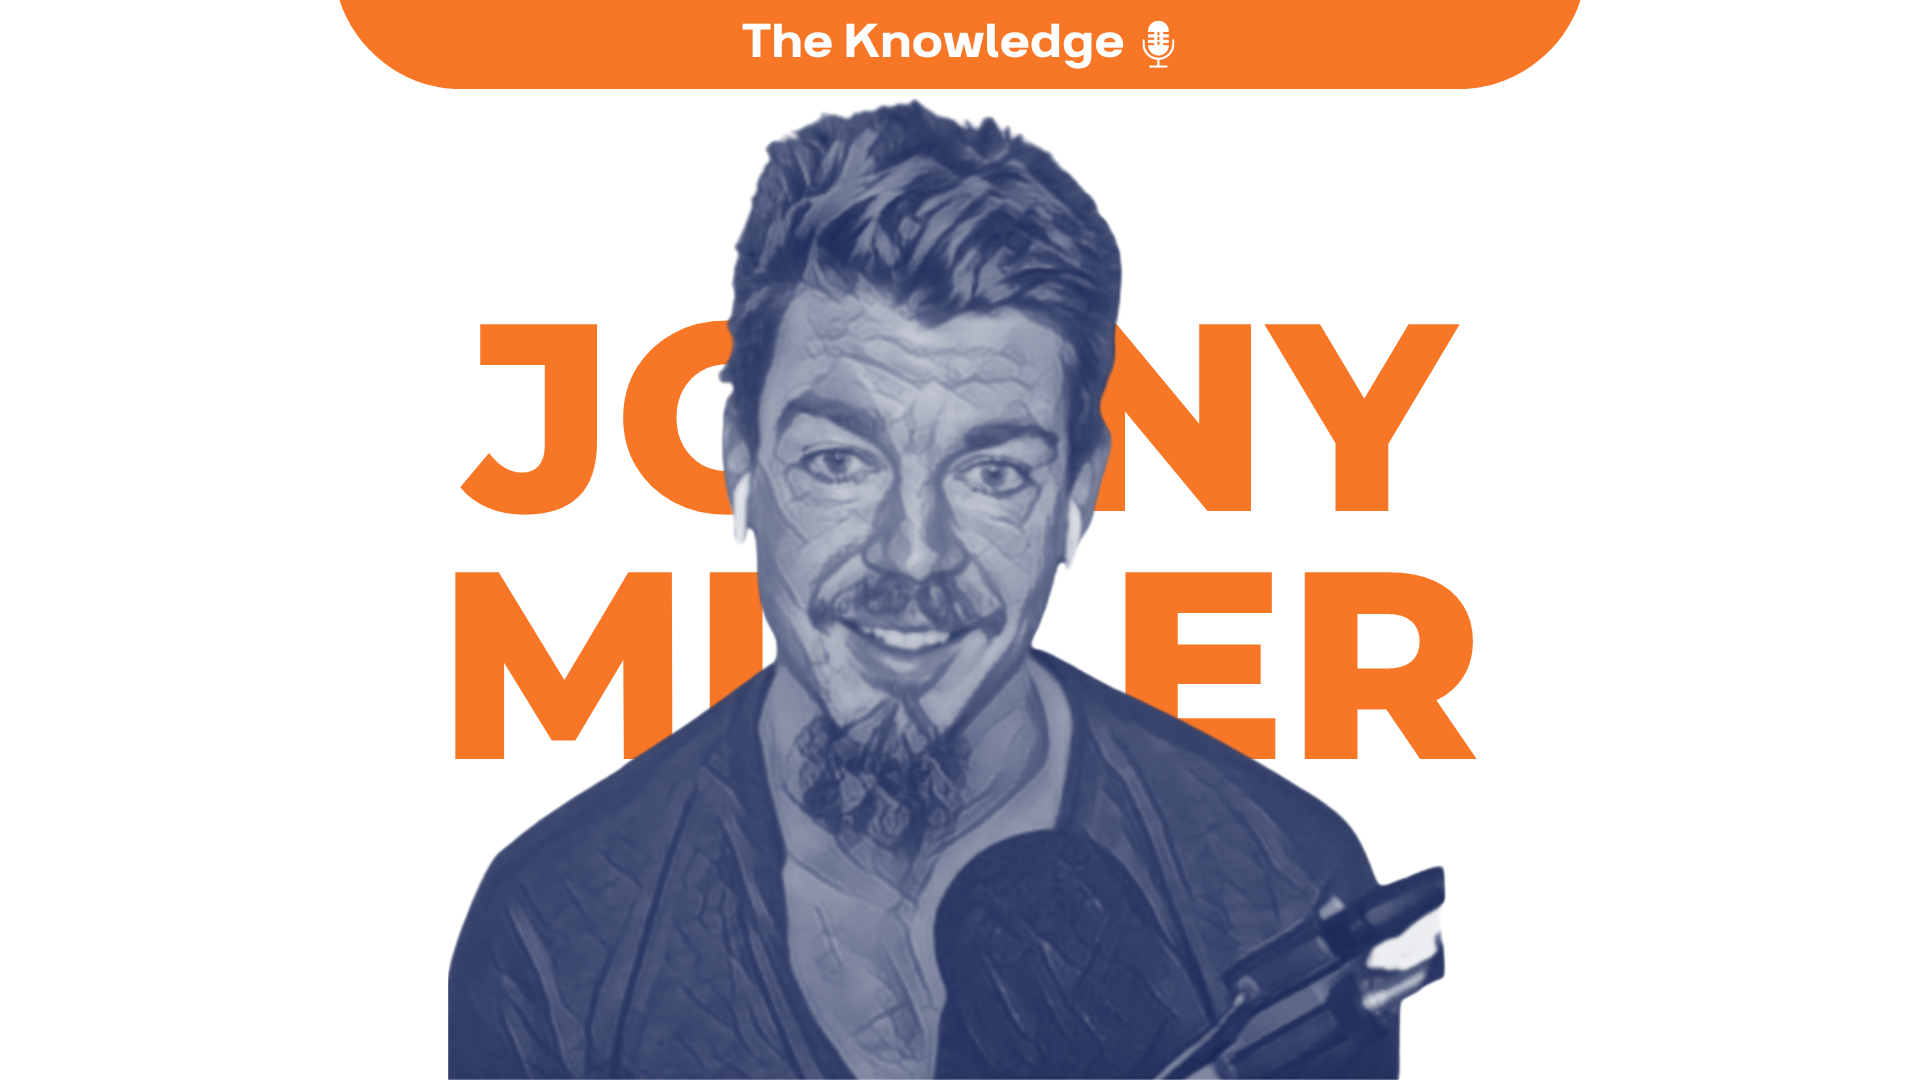 🎙️Mortality, Meditation, and Meaning with Jonny Miller